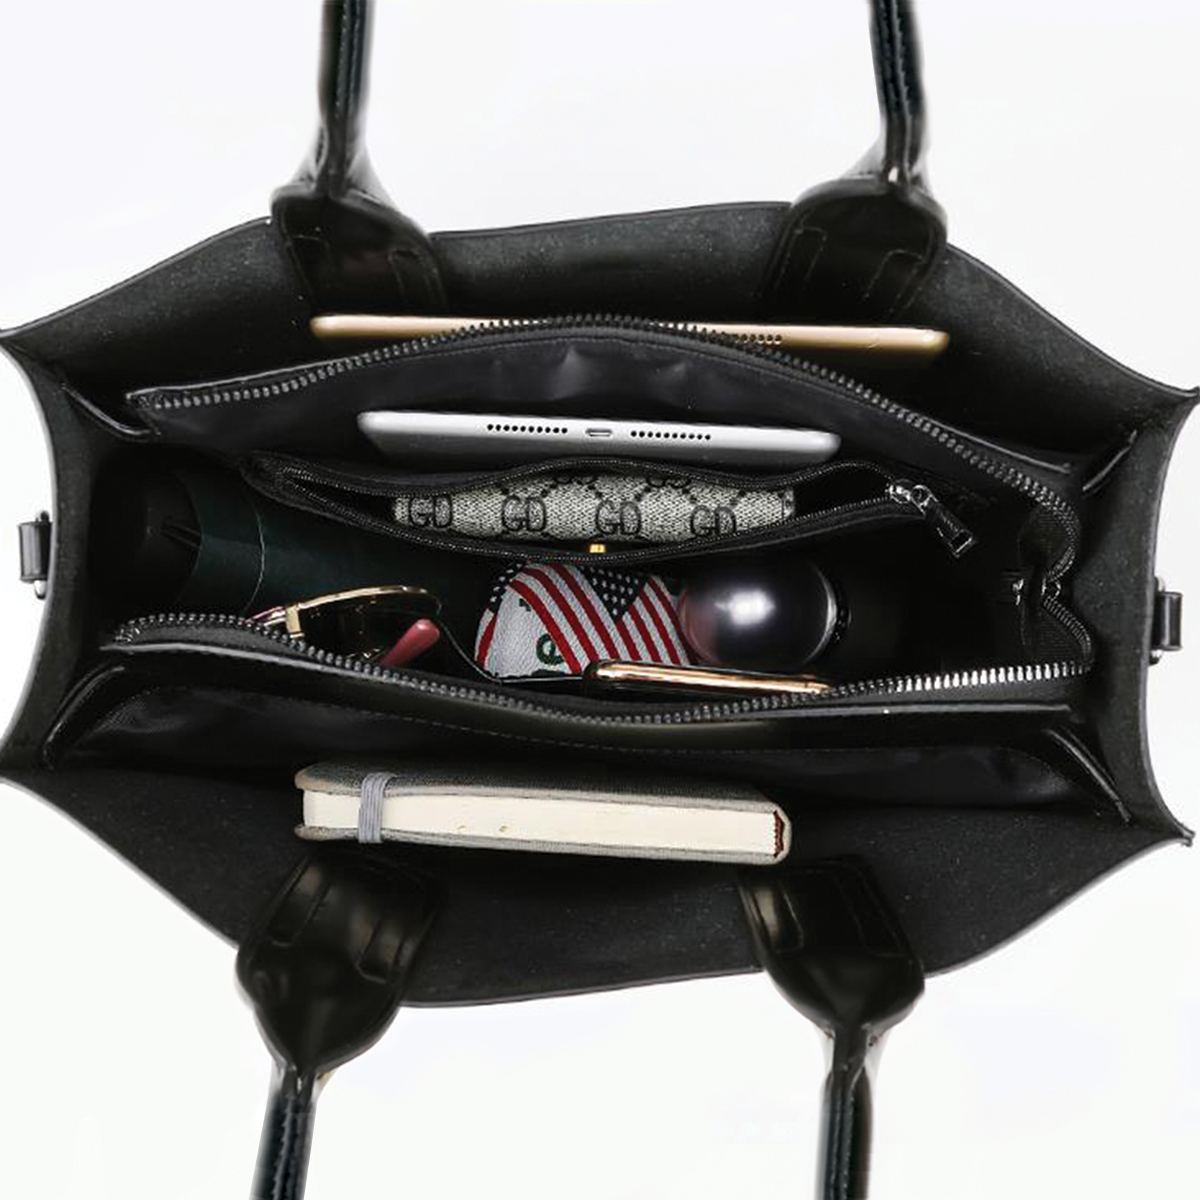 Reduce Stress At Work With Chinese Crested - Luxury Handbag V1